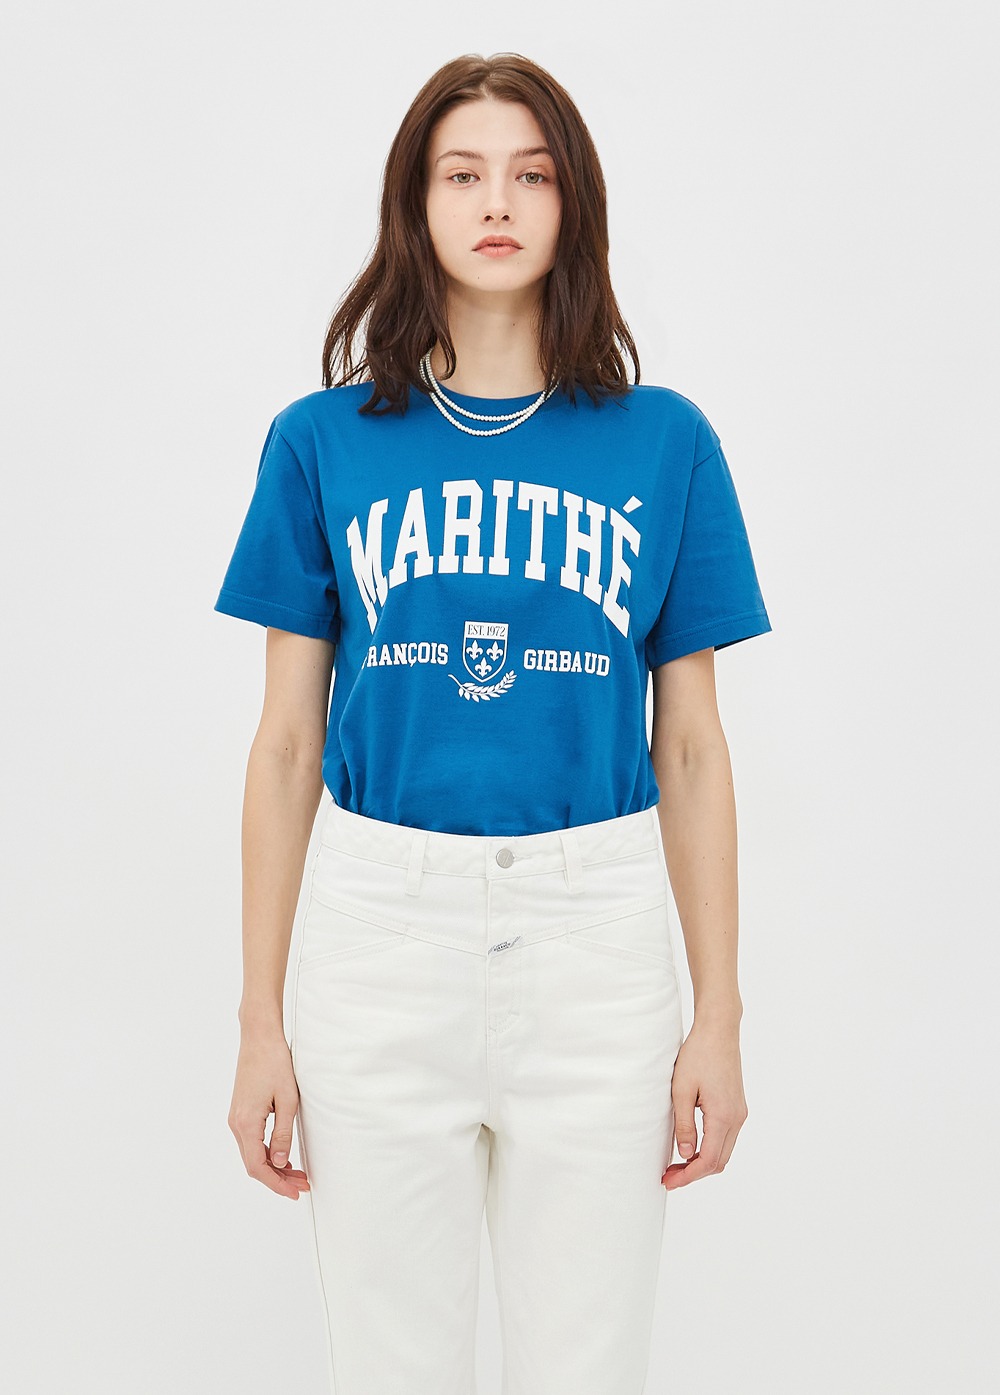 MARITHE COLLEGE TEE blue